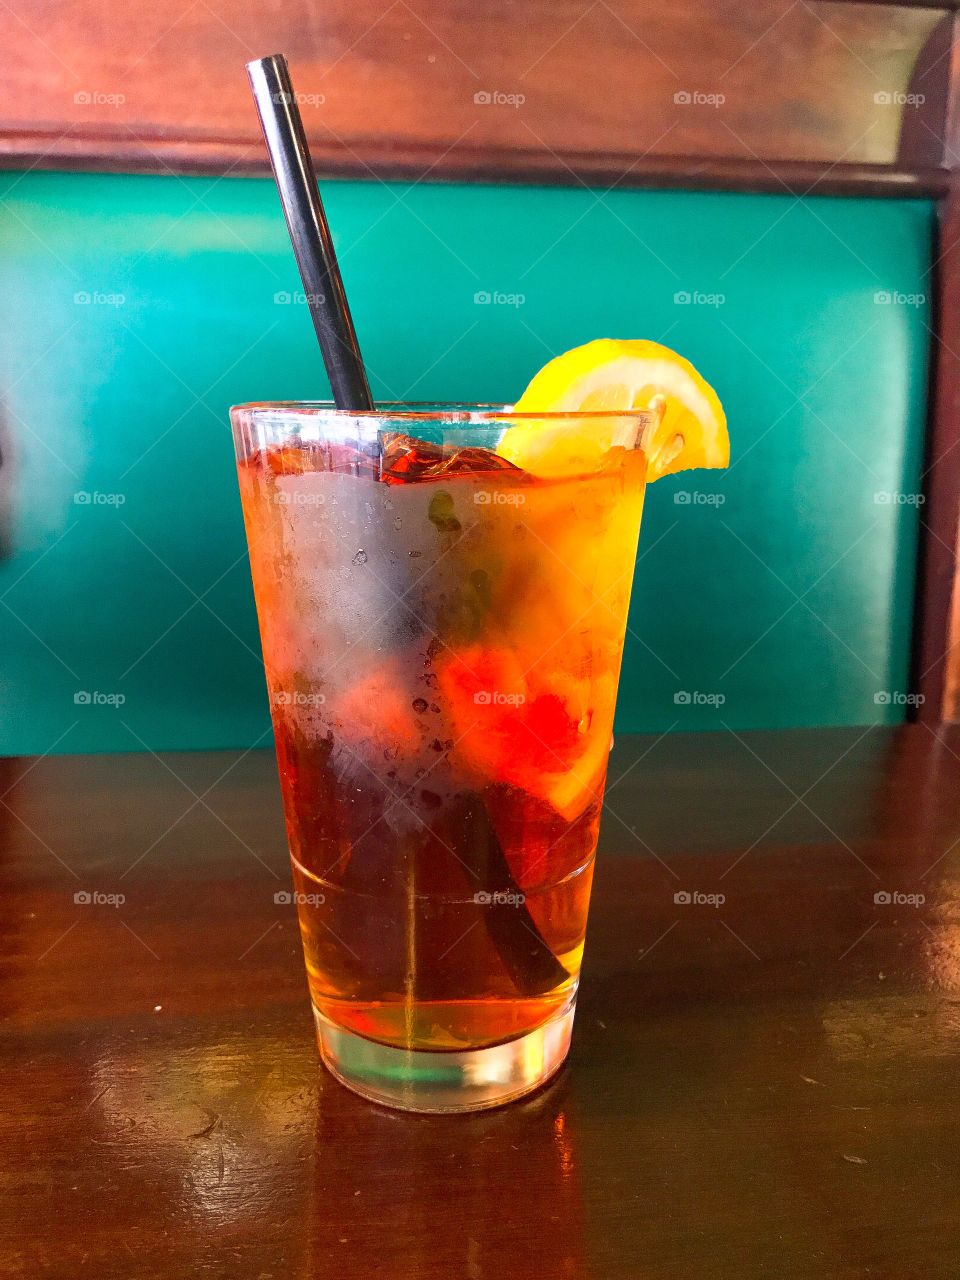 Delicious Refreshing Ice Cold Iced Tea with Lemon and a Straw 